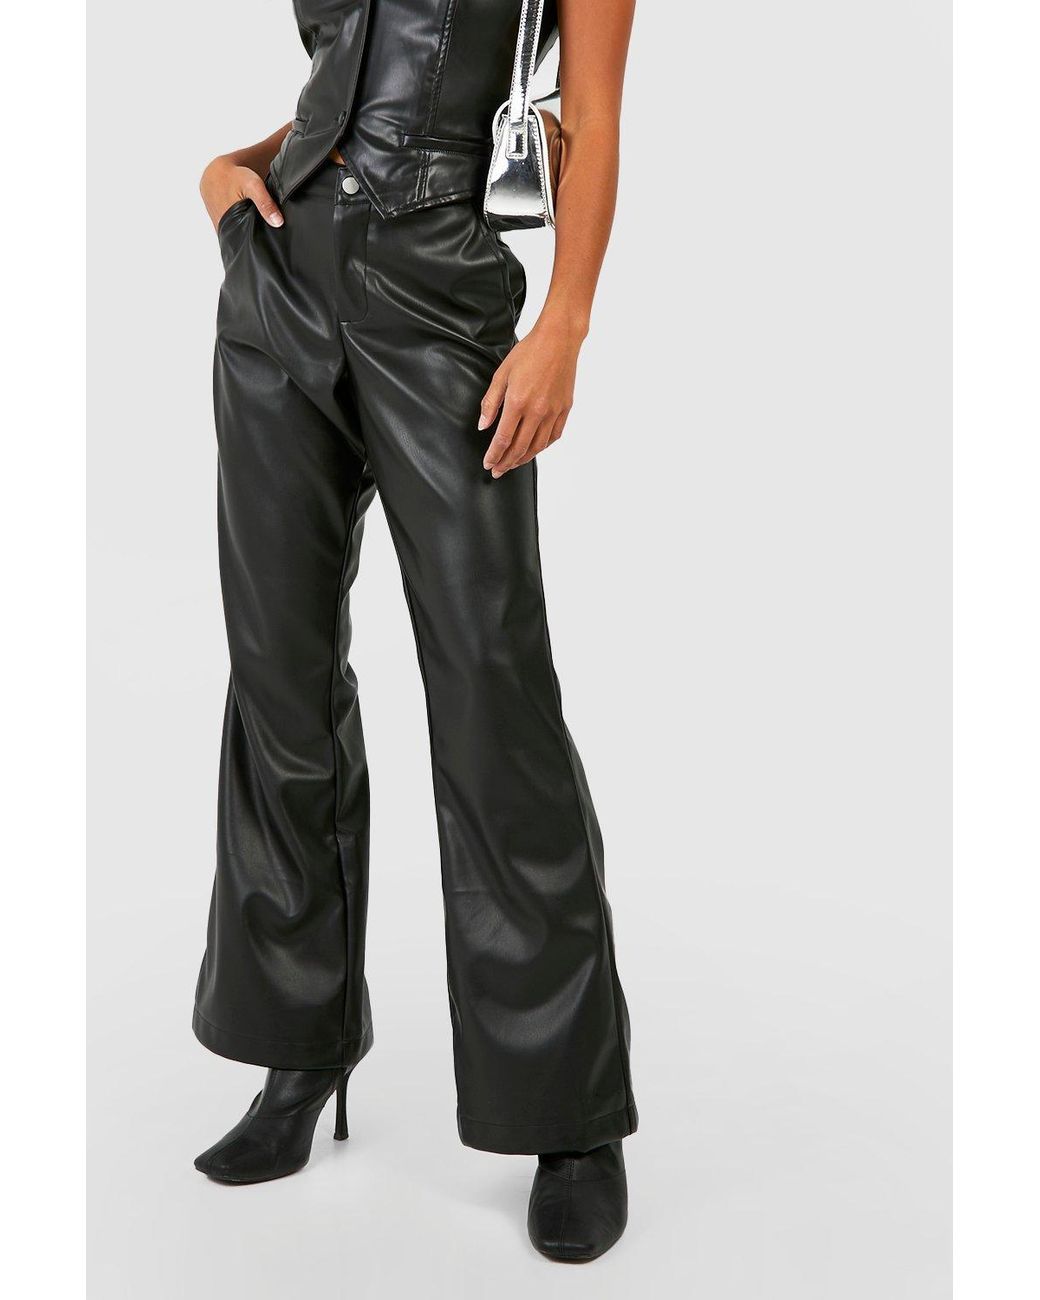 Cotton Black High Waisted Flared Trousers